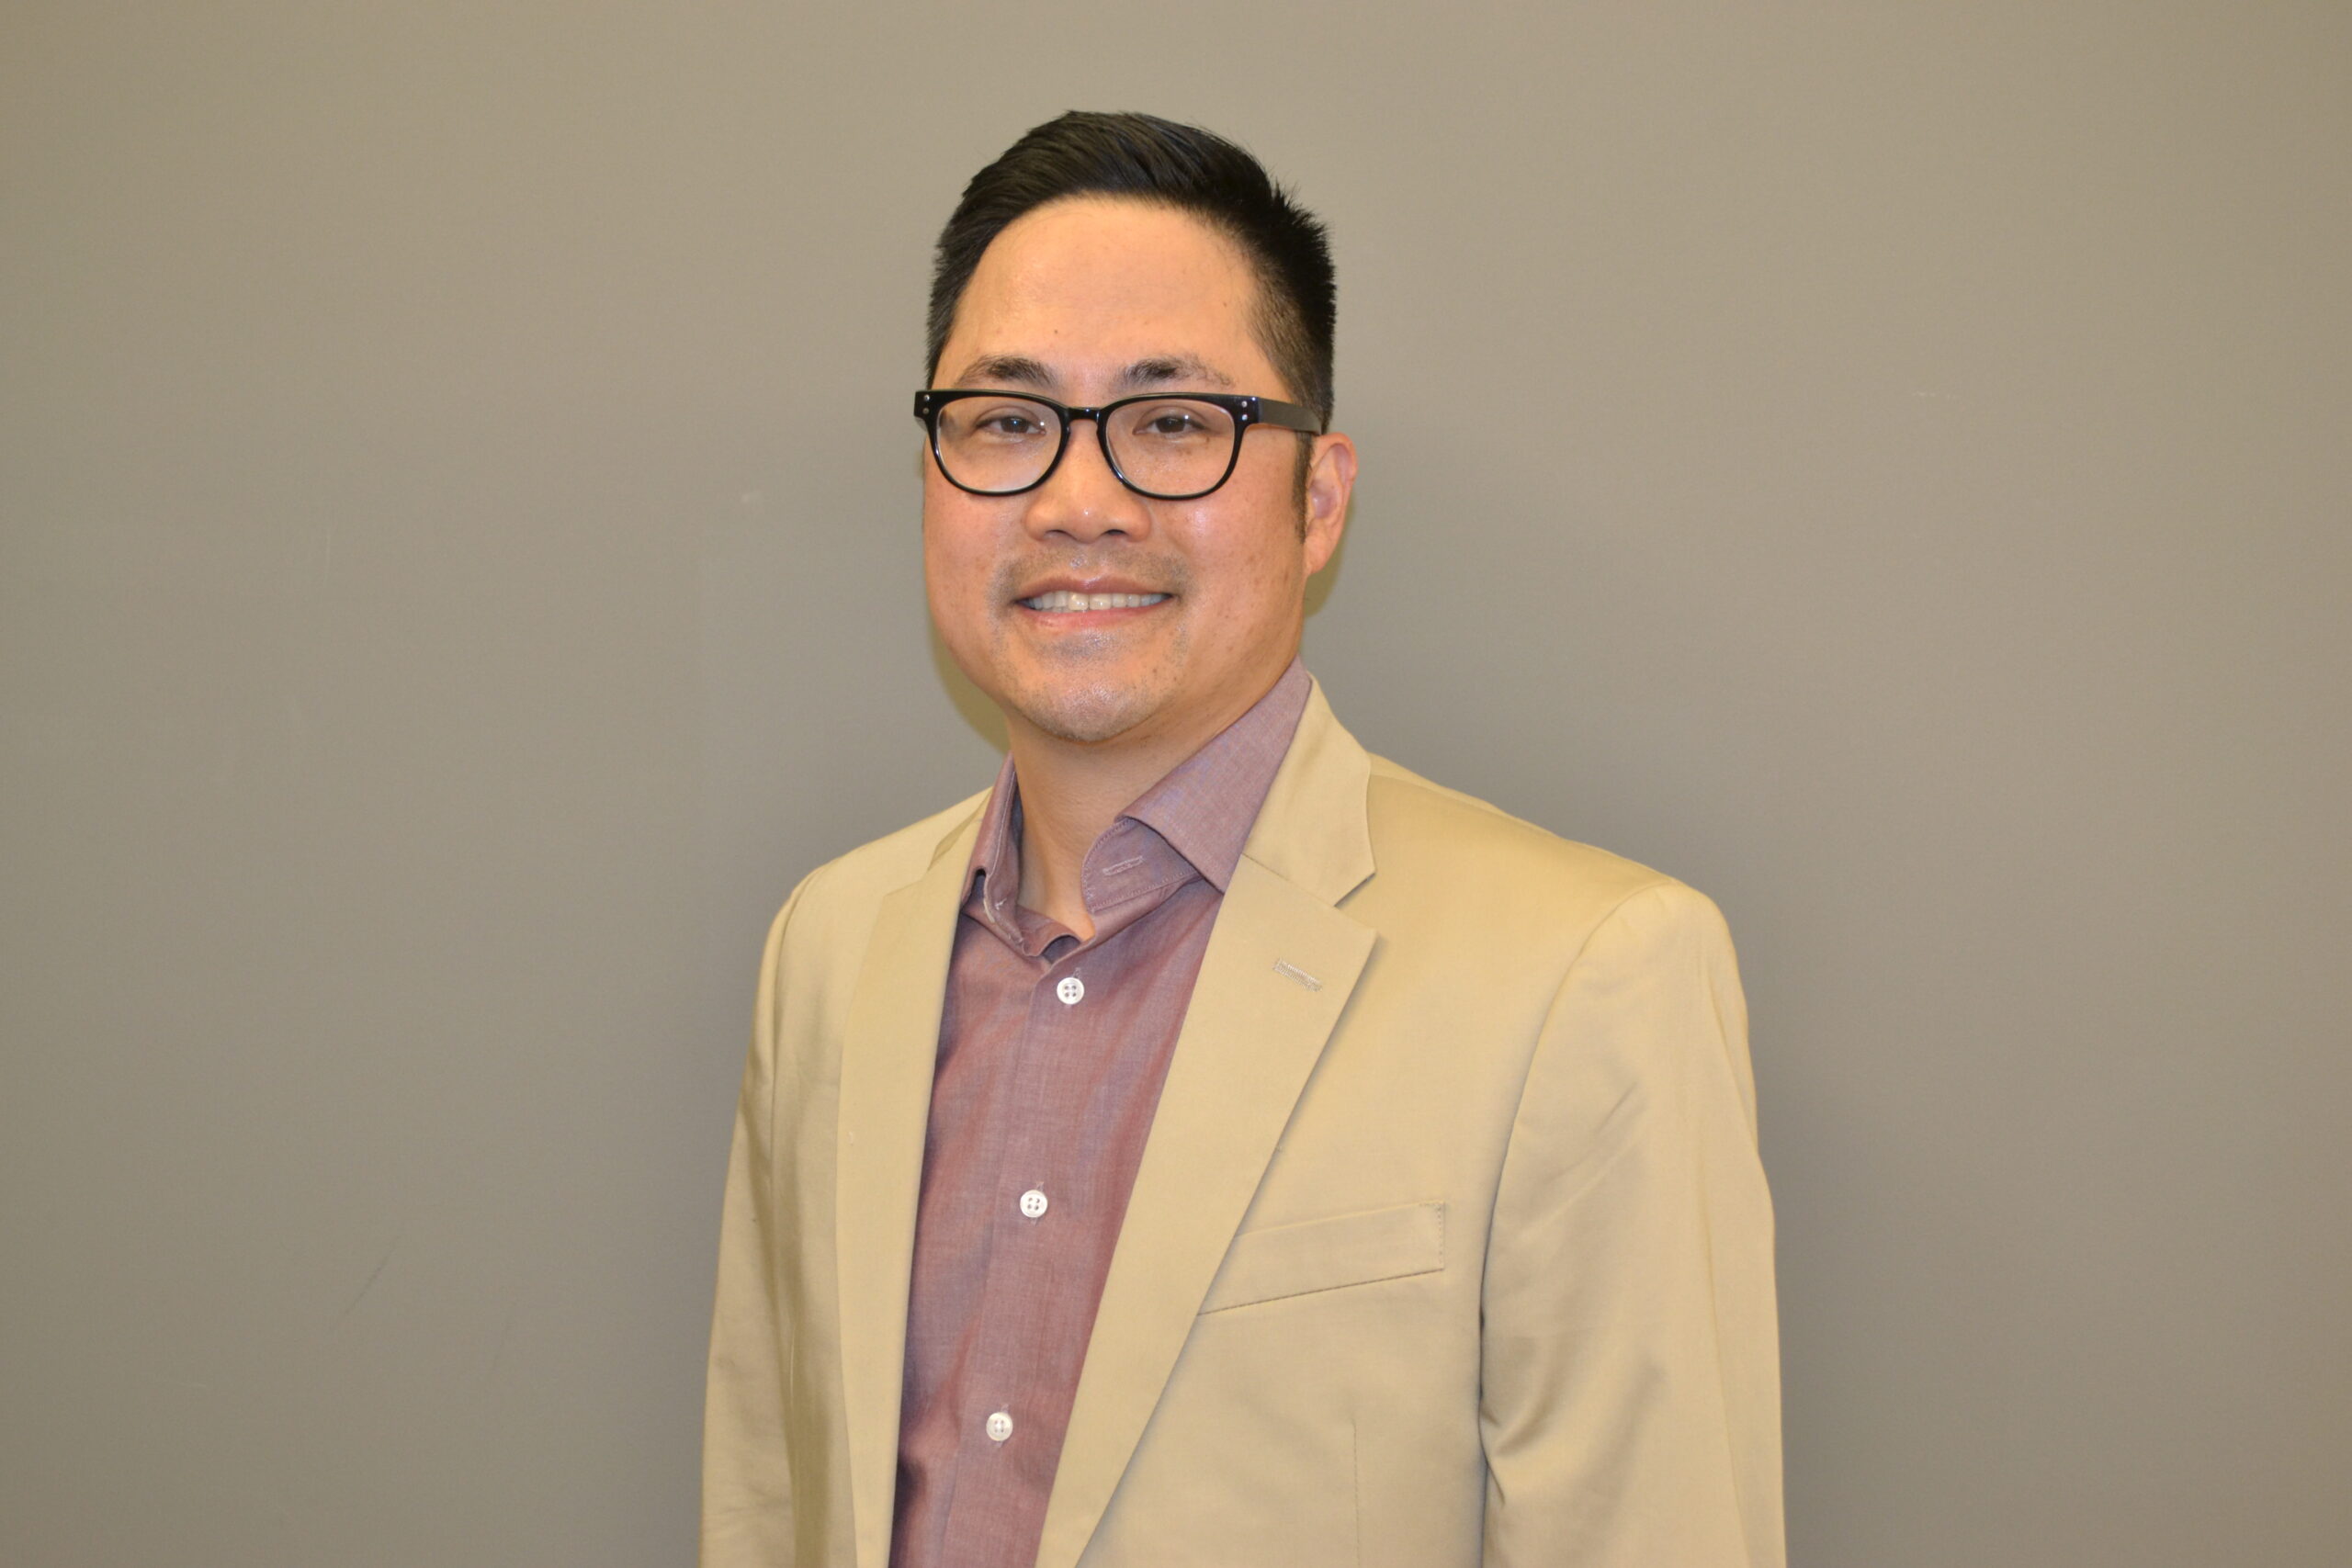 DEC Welcomes new Director of Policy and Advocacy, Didier Trinh